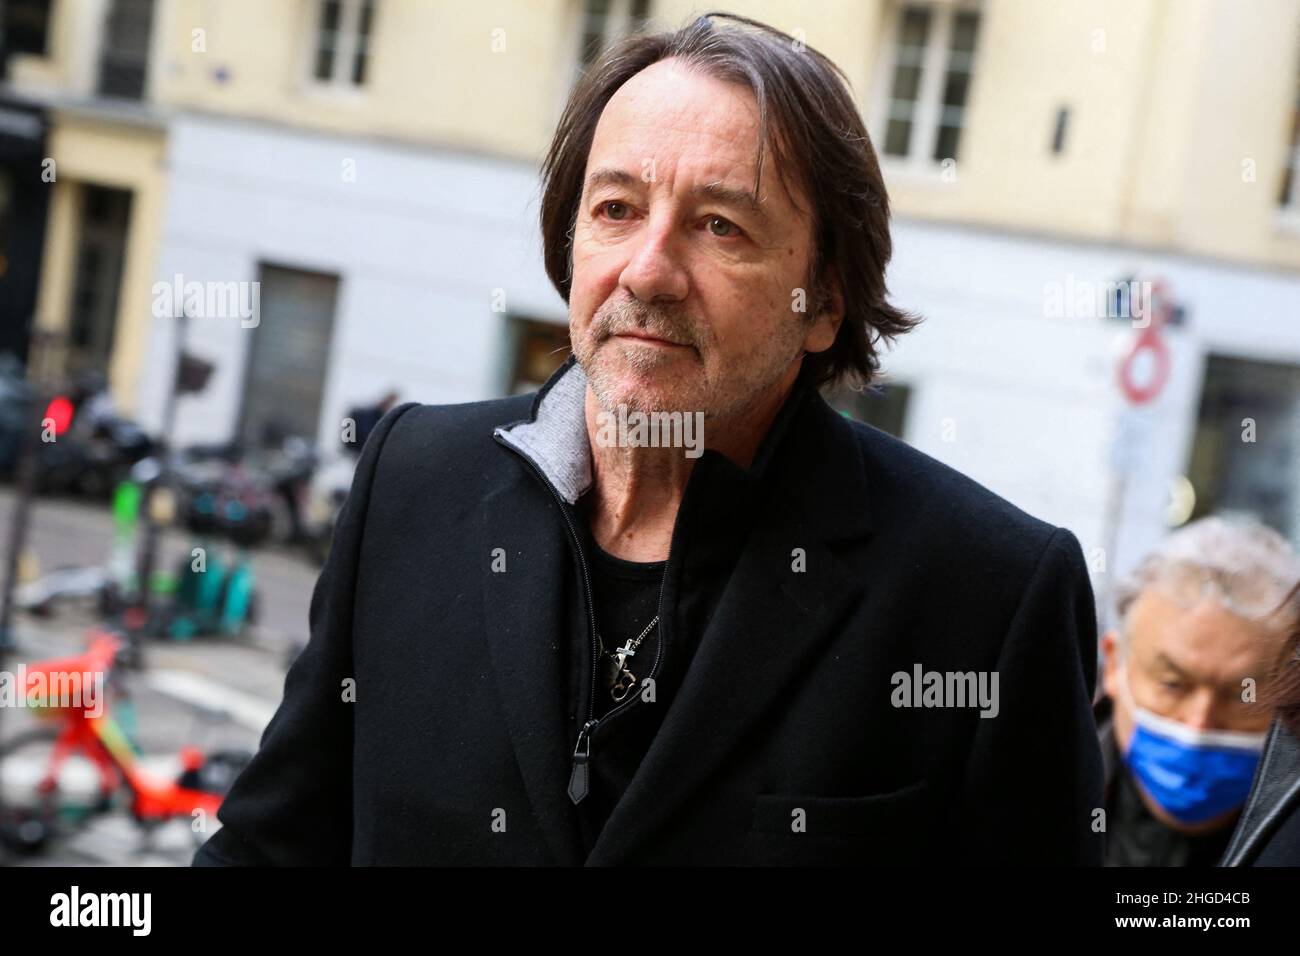 Paris, France. 20th Jan, 2022. Jean-Hugues Anglade the funeral of French  cinema director Jean-Jacques Beineix at Saint Roch church in Paris, France  on January 20, 2022. Beineix whose films include Diva, The